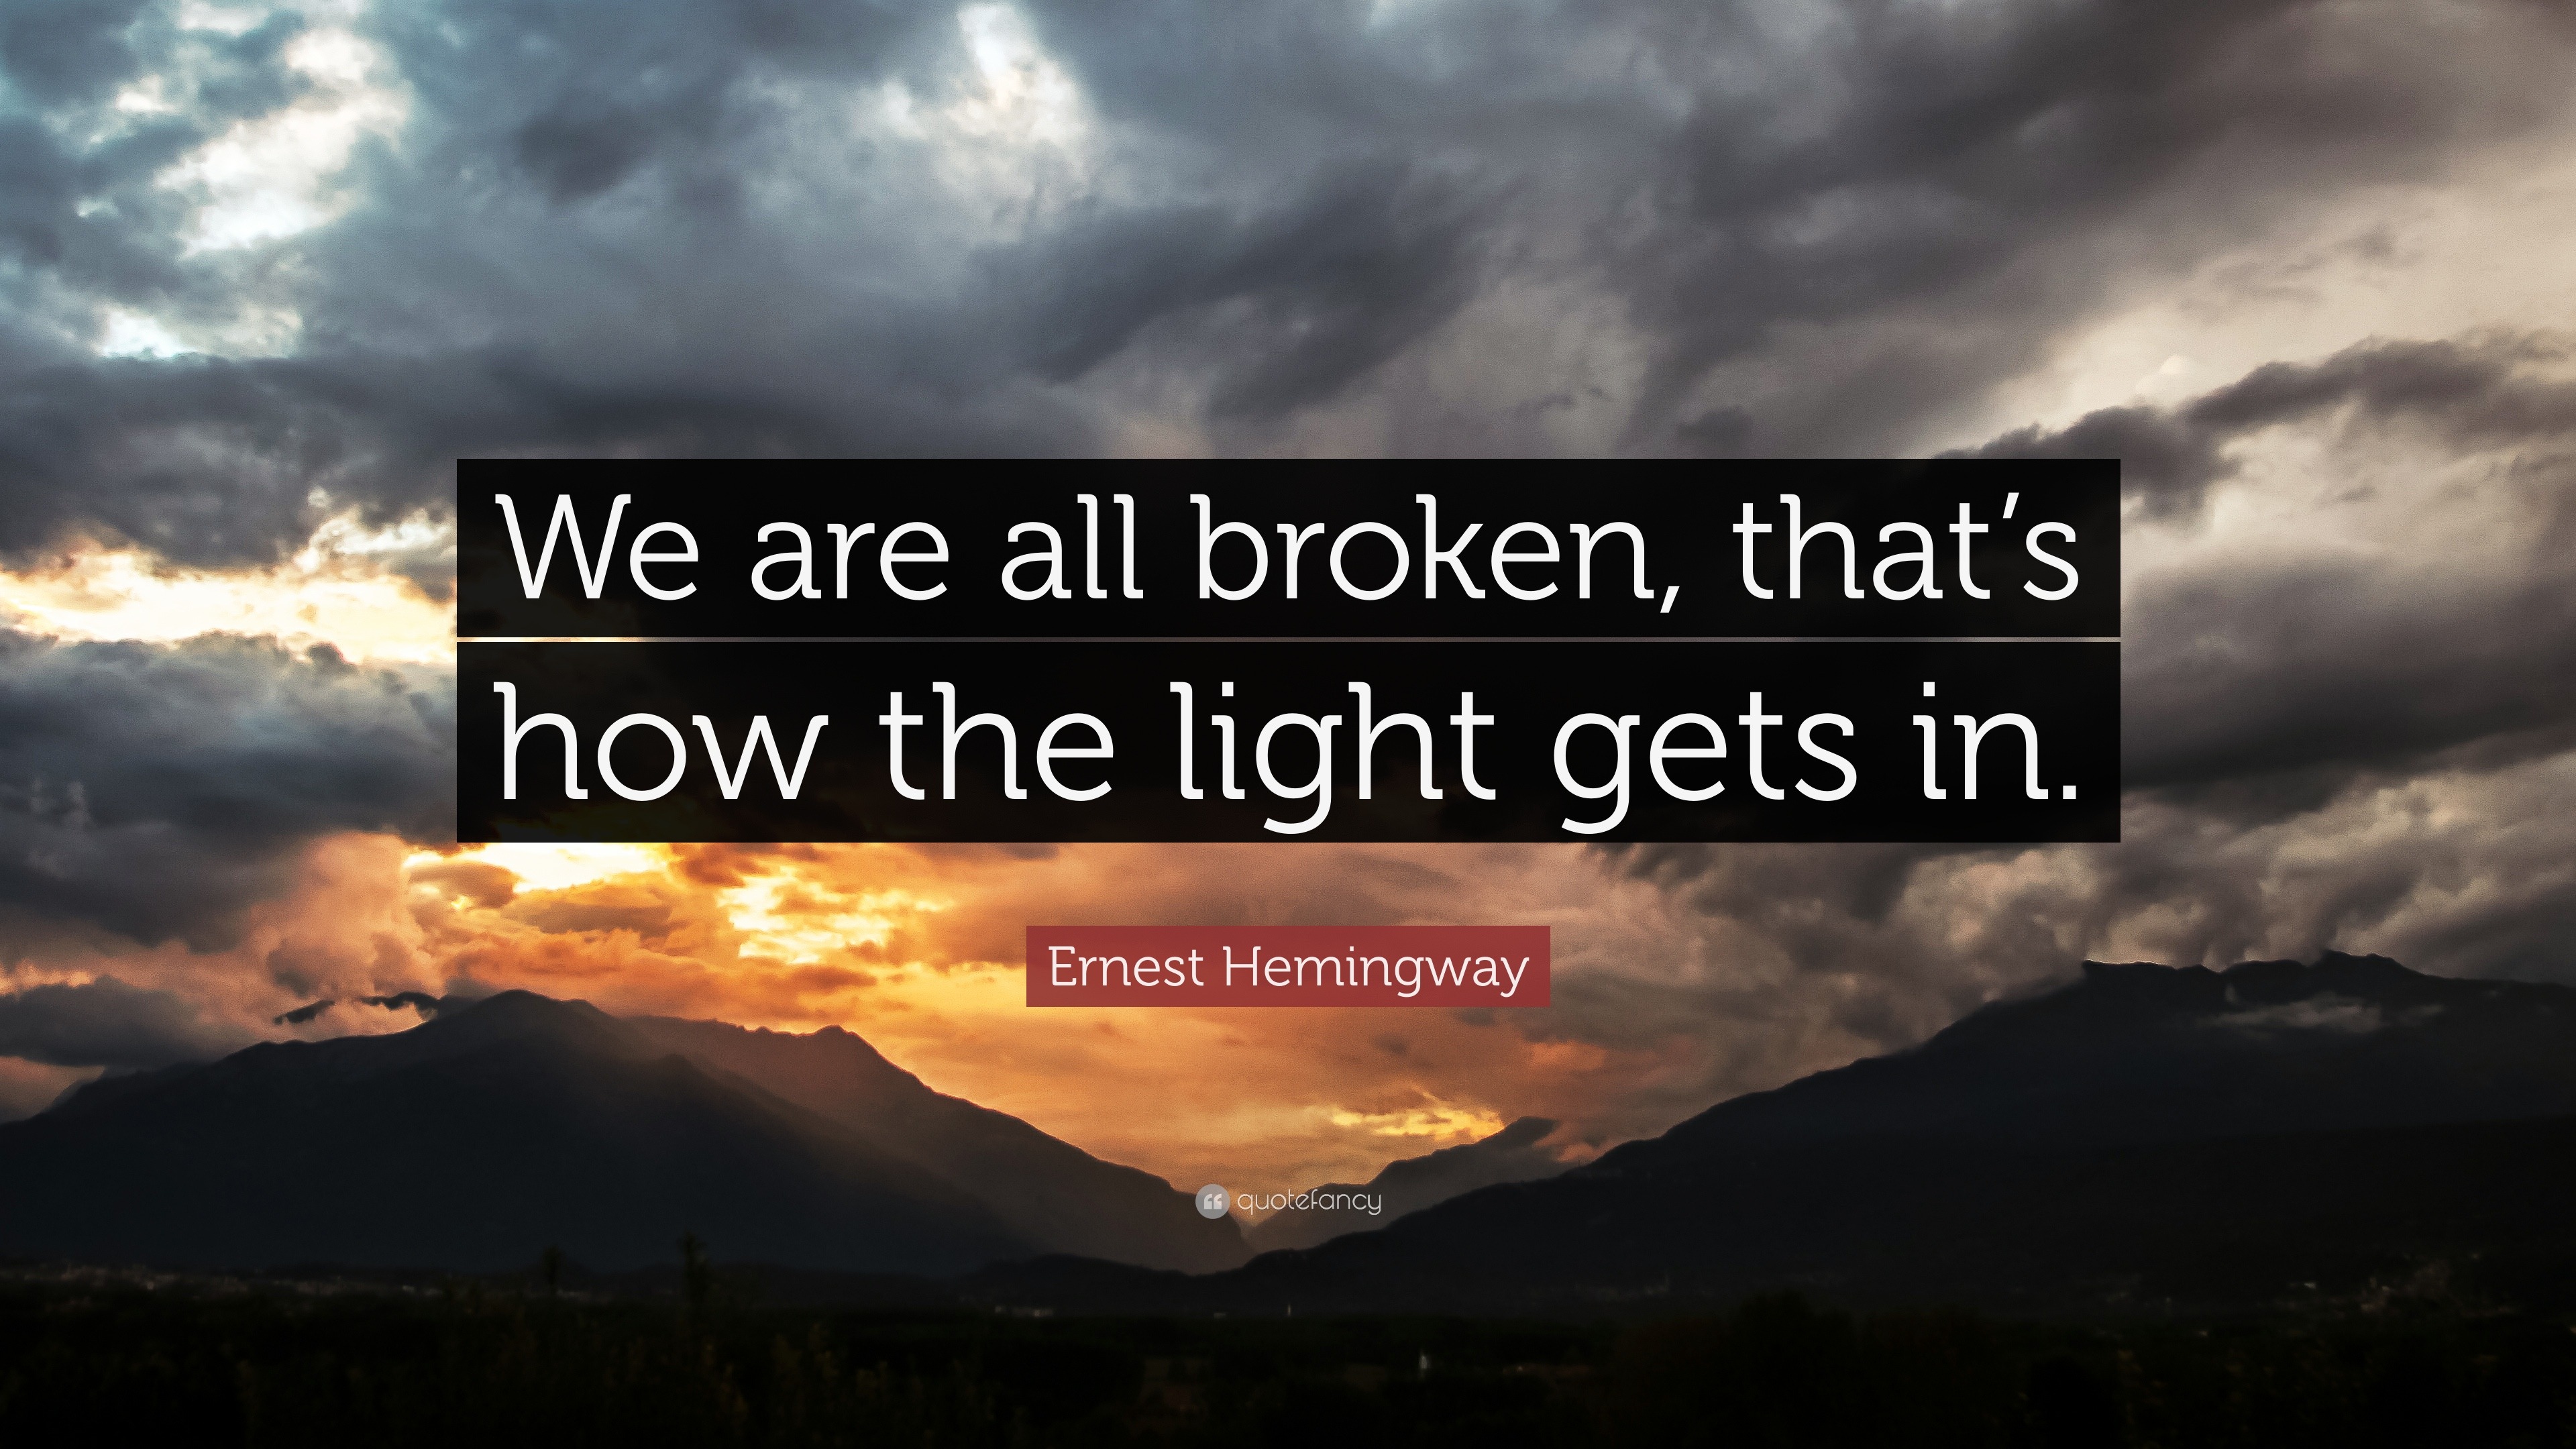 Ernest Hemingway “We are all that's how the gets in.”